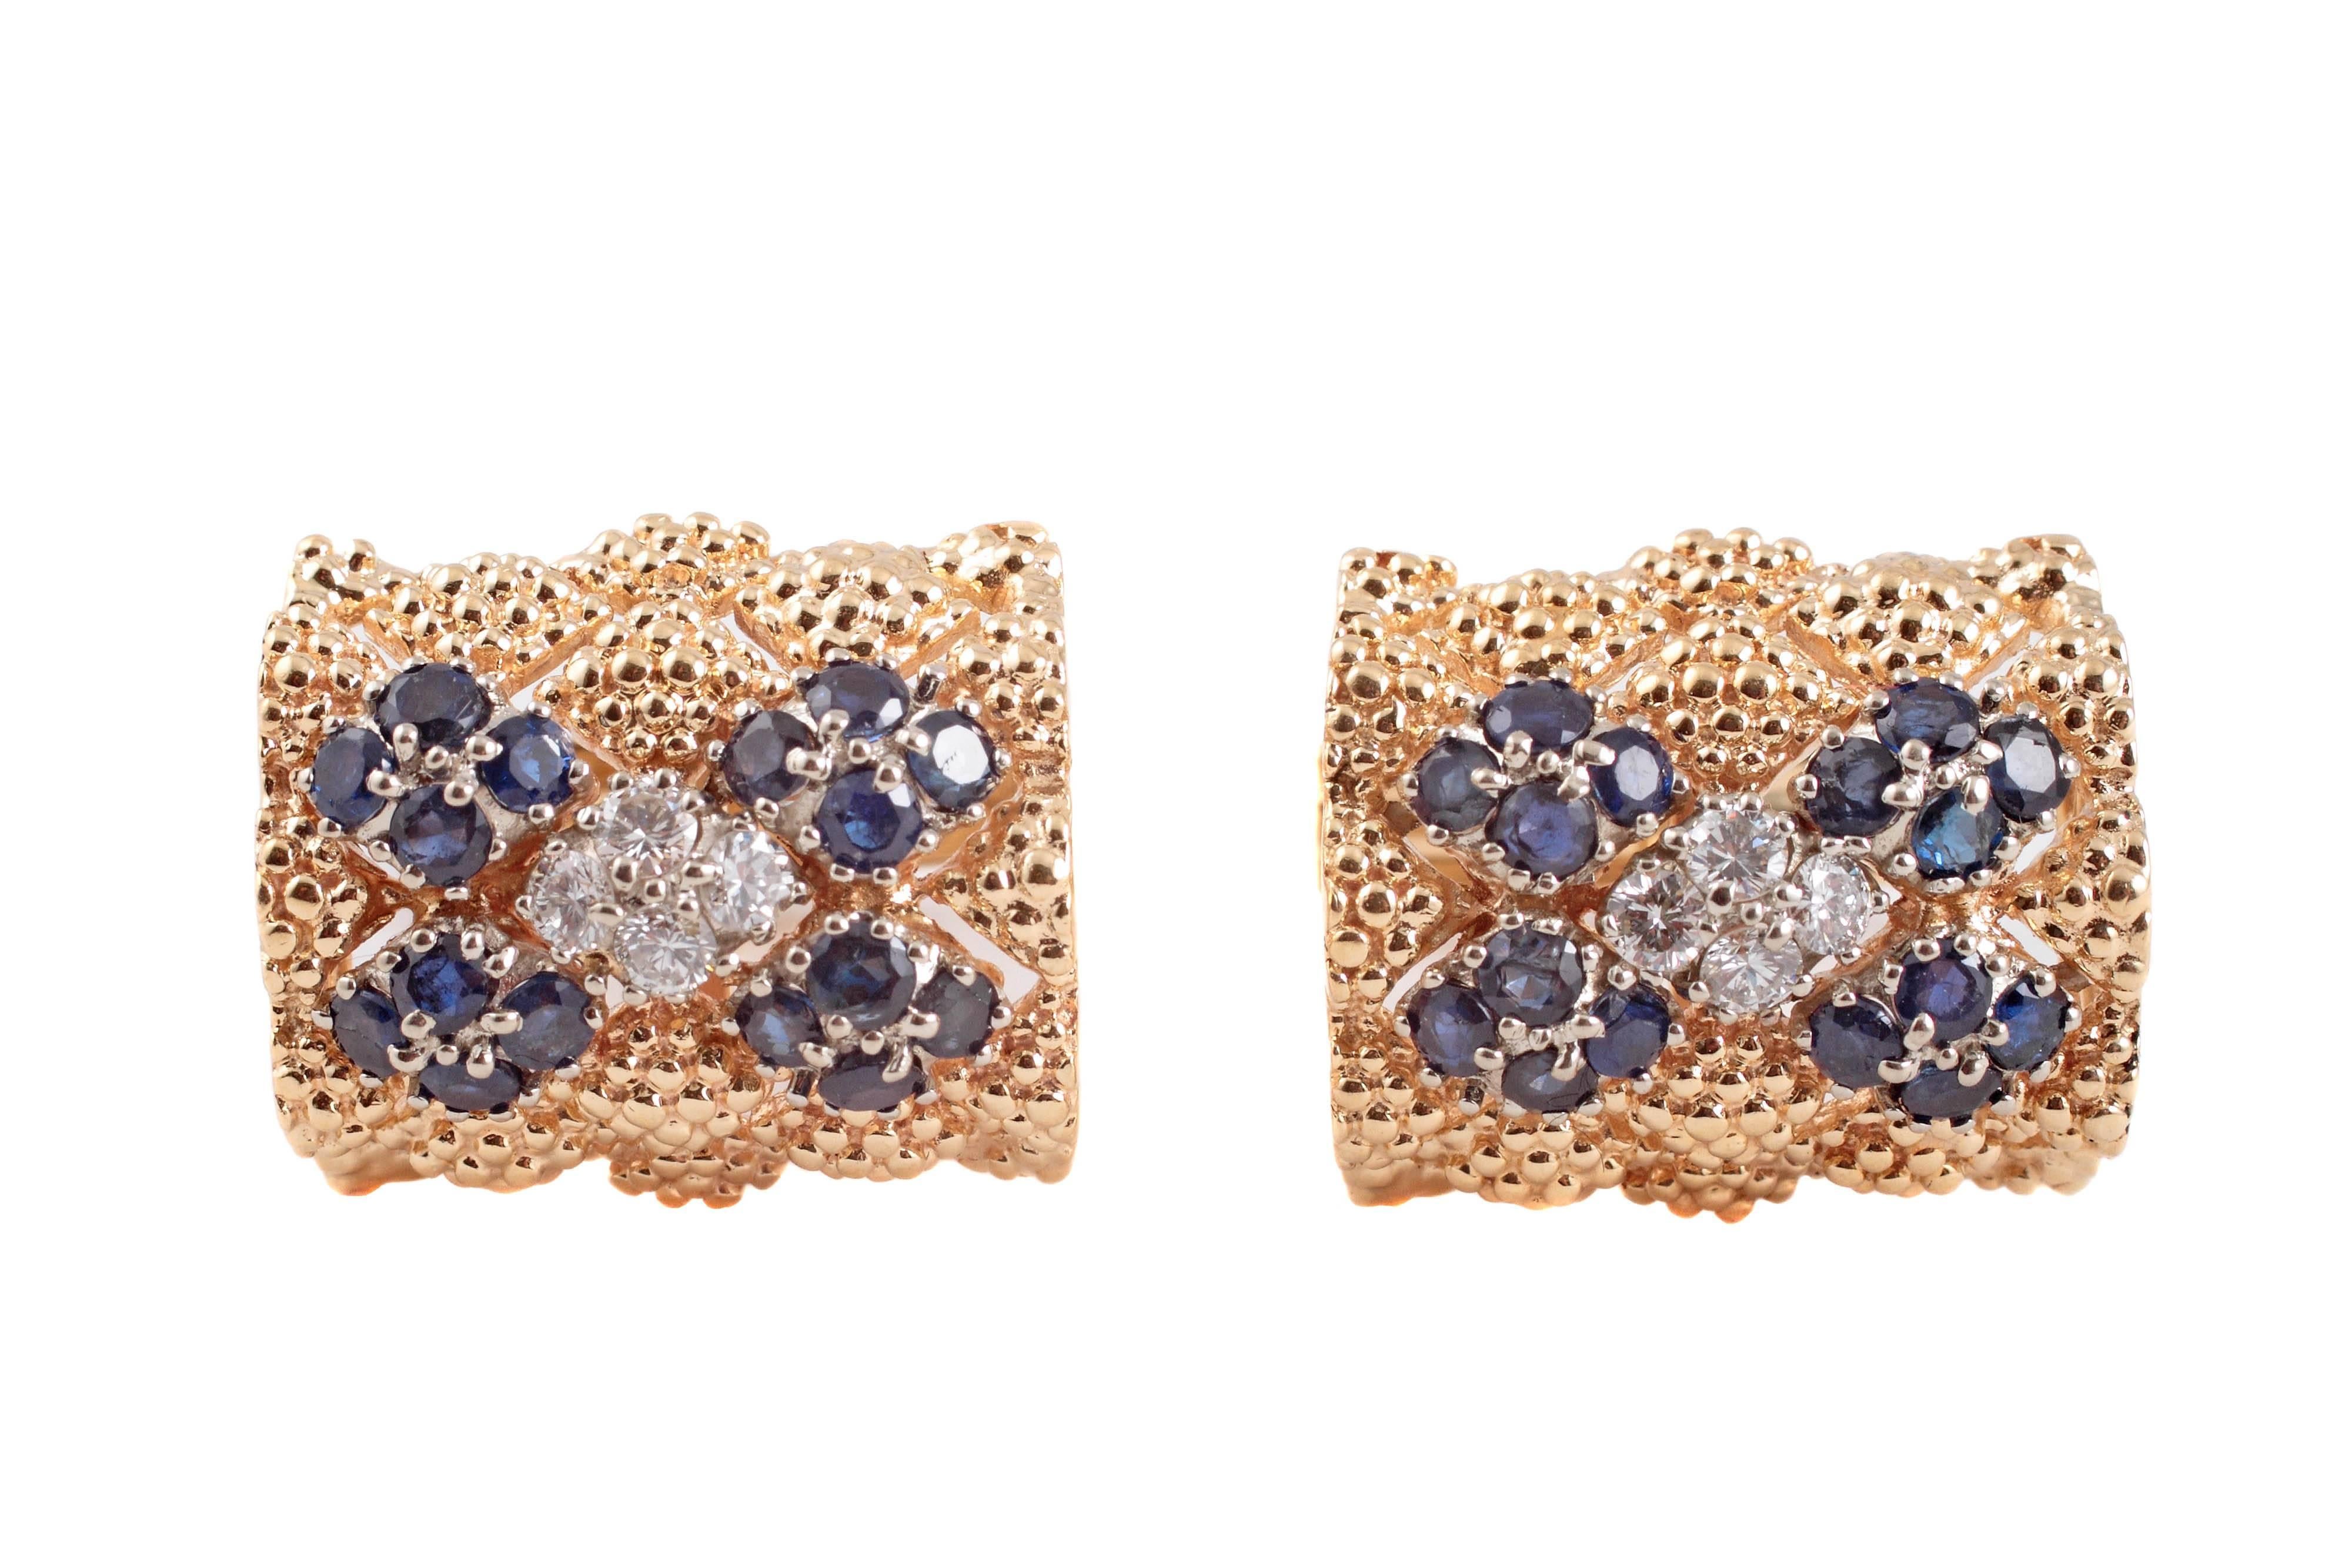 Beautifully raised and textured yellow gold cufflinks centered with small grouping of 4 diamonds cornered with blue sapphires.  The pair makes a great statement for the right man or woman who is confident enough to carry them off.   